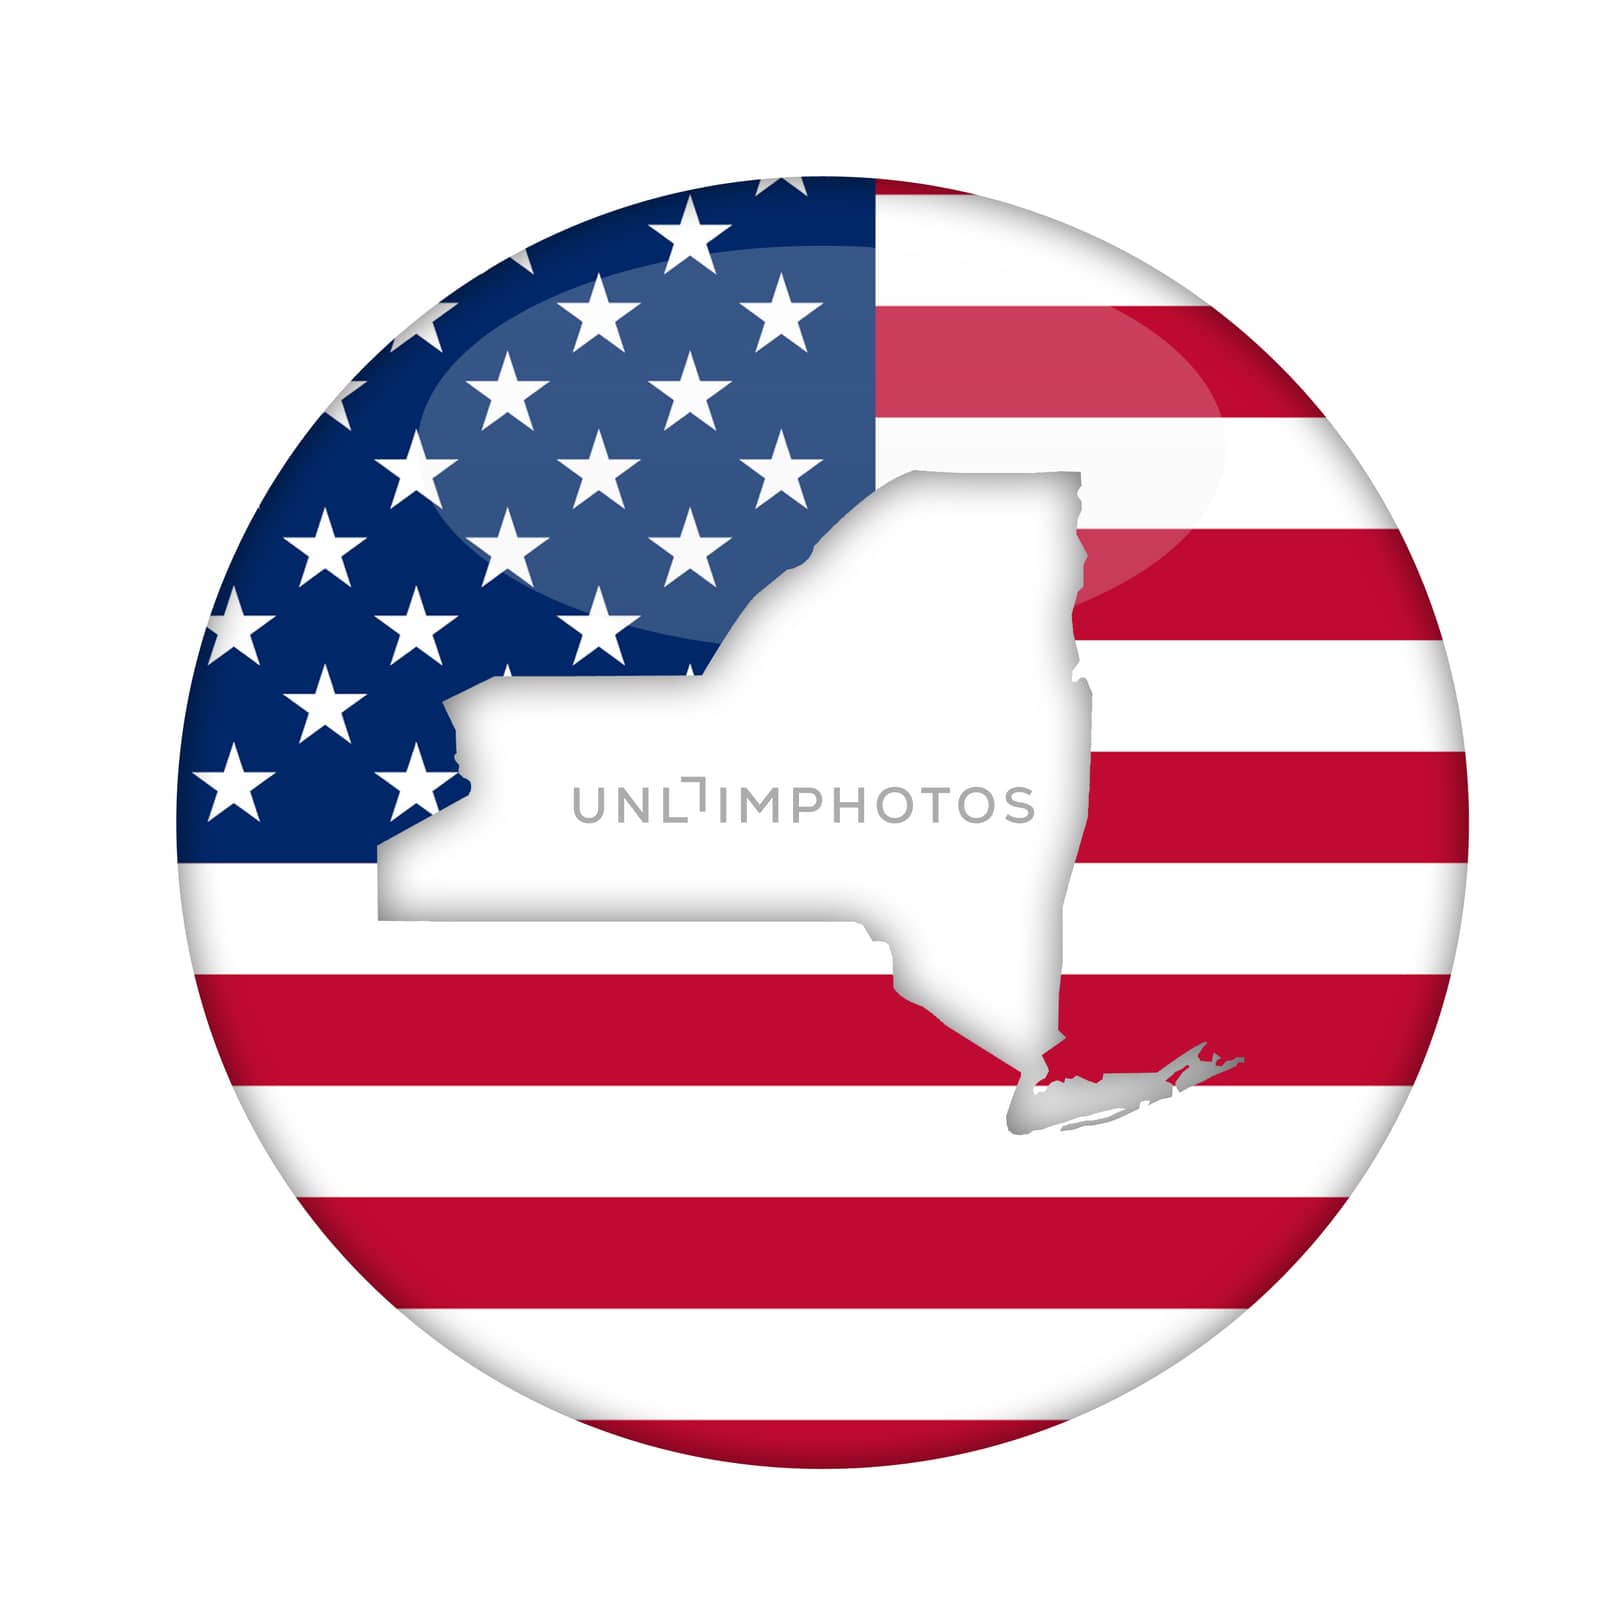 New York state of America badge isolated on a white background.